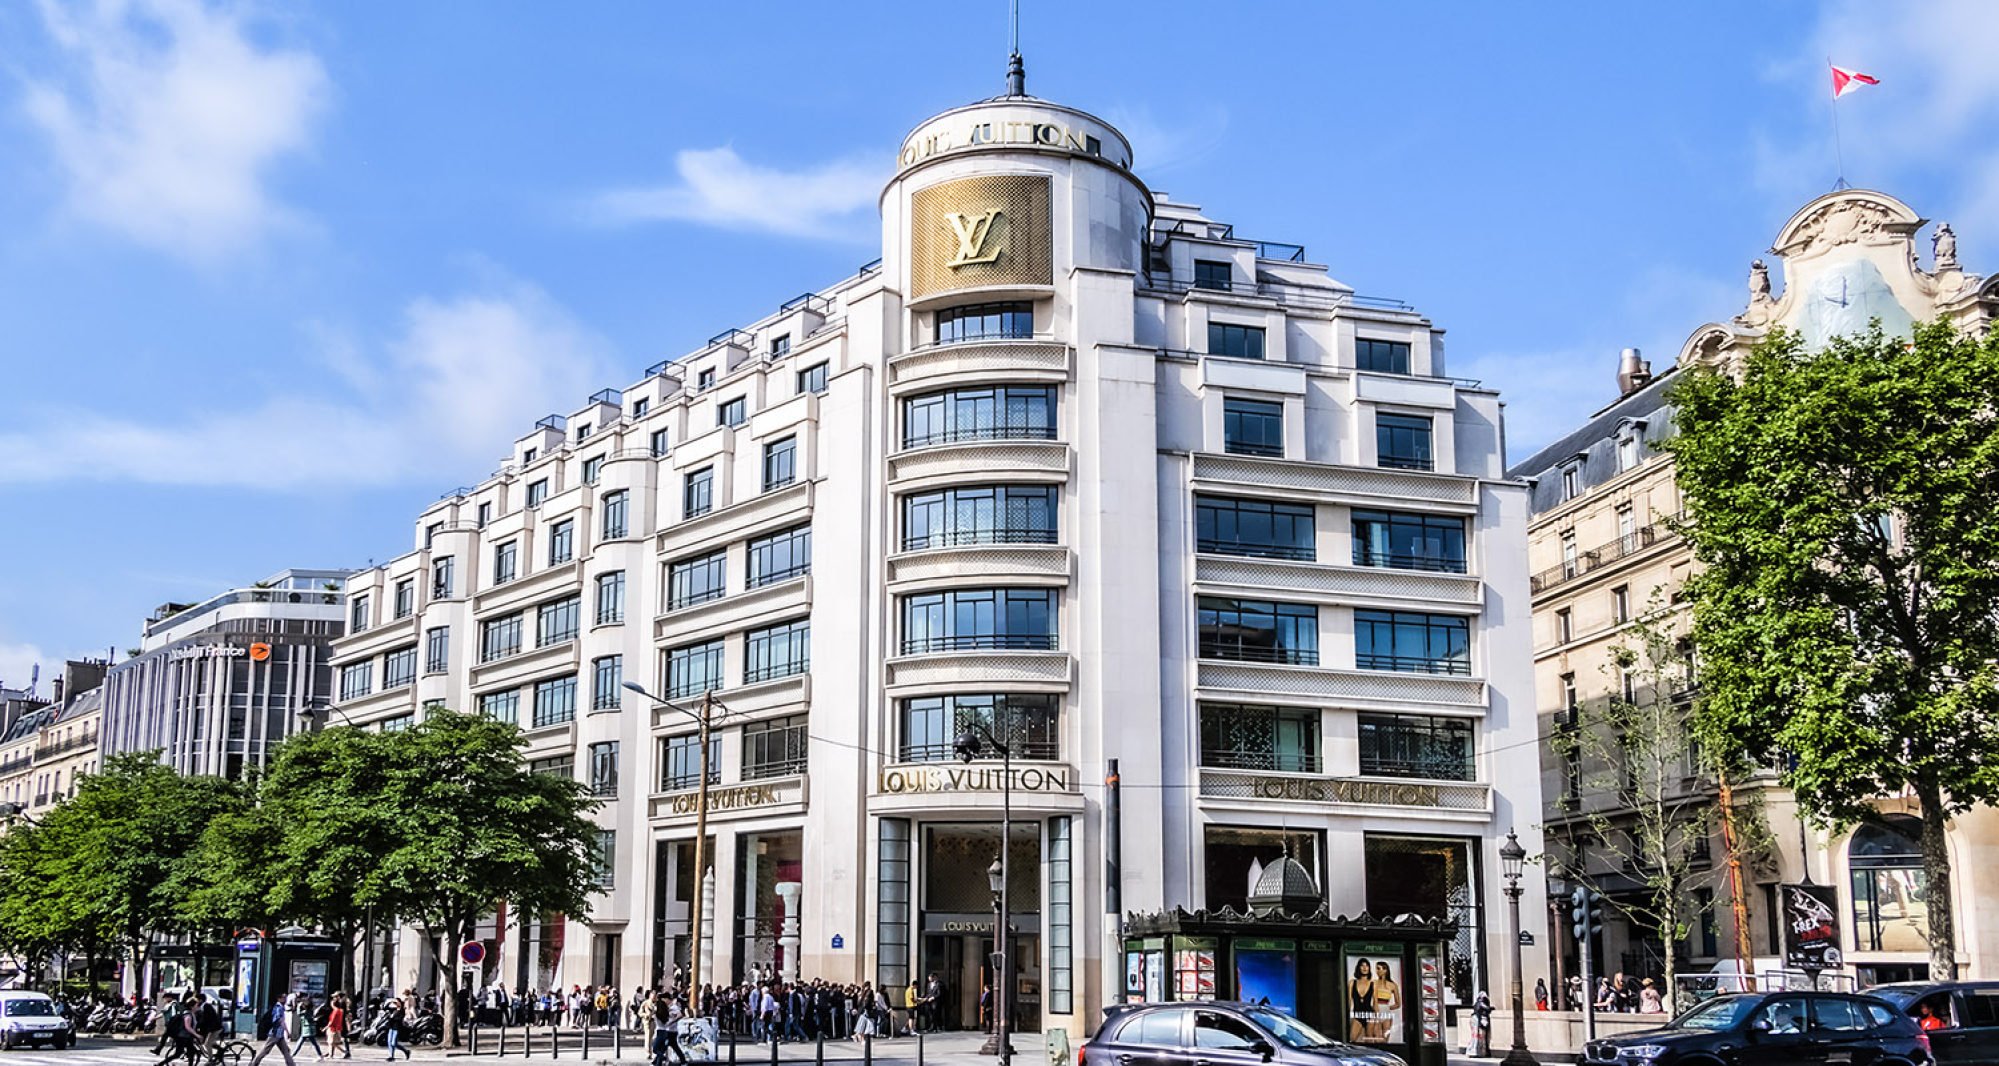 Live it up at LV? 6 luxury fashion brands with their own hotels, from Louis  Vuitton's upcoming Paris property and Palazzo Versace's new Macau location,  to the Armani Hotel at Burj Khalifa